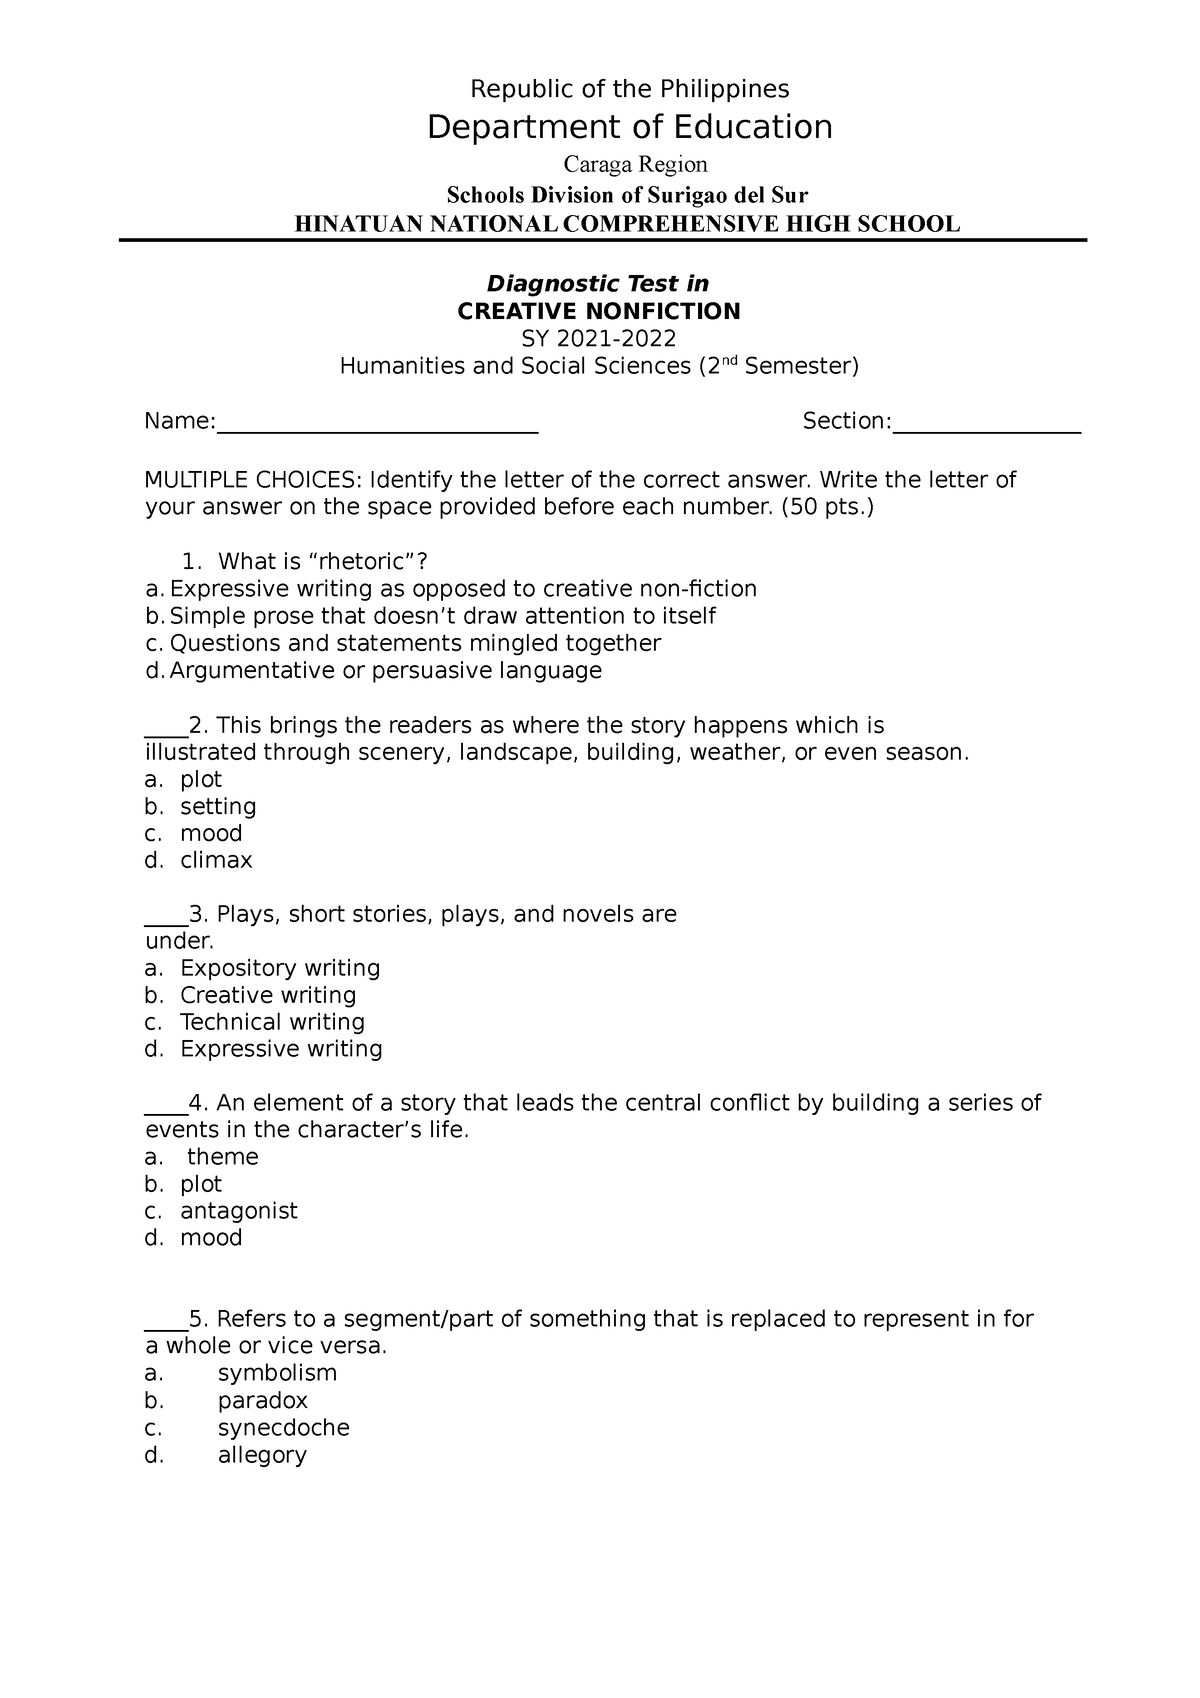 creative writing diagnostic test with answer key